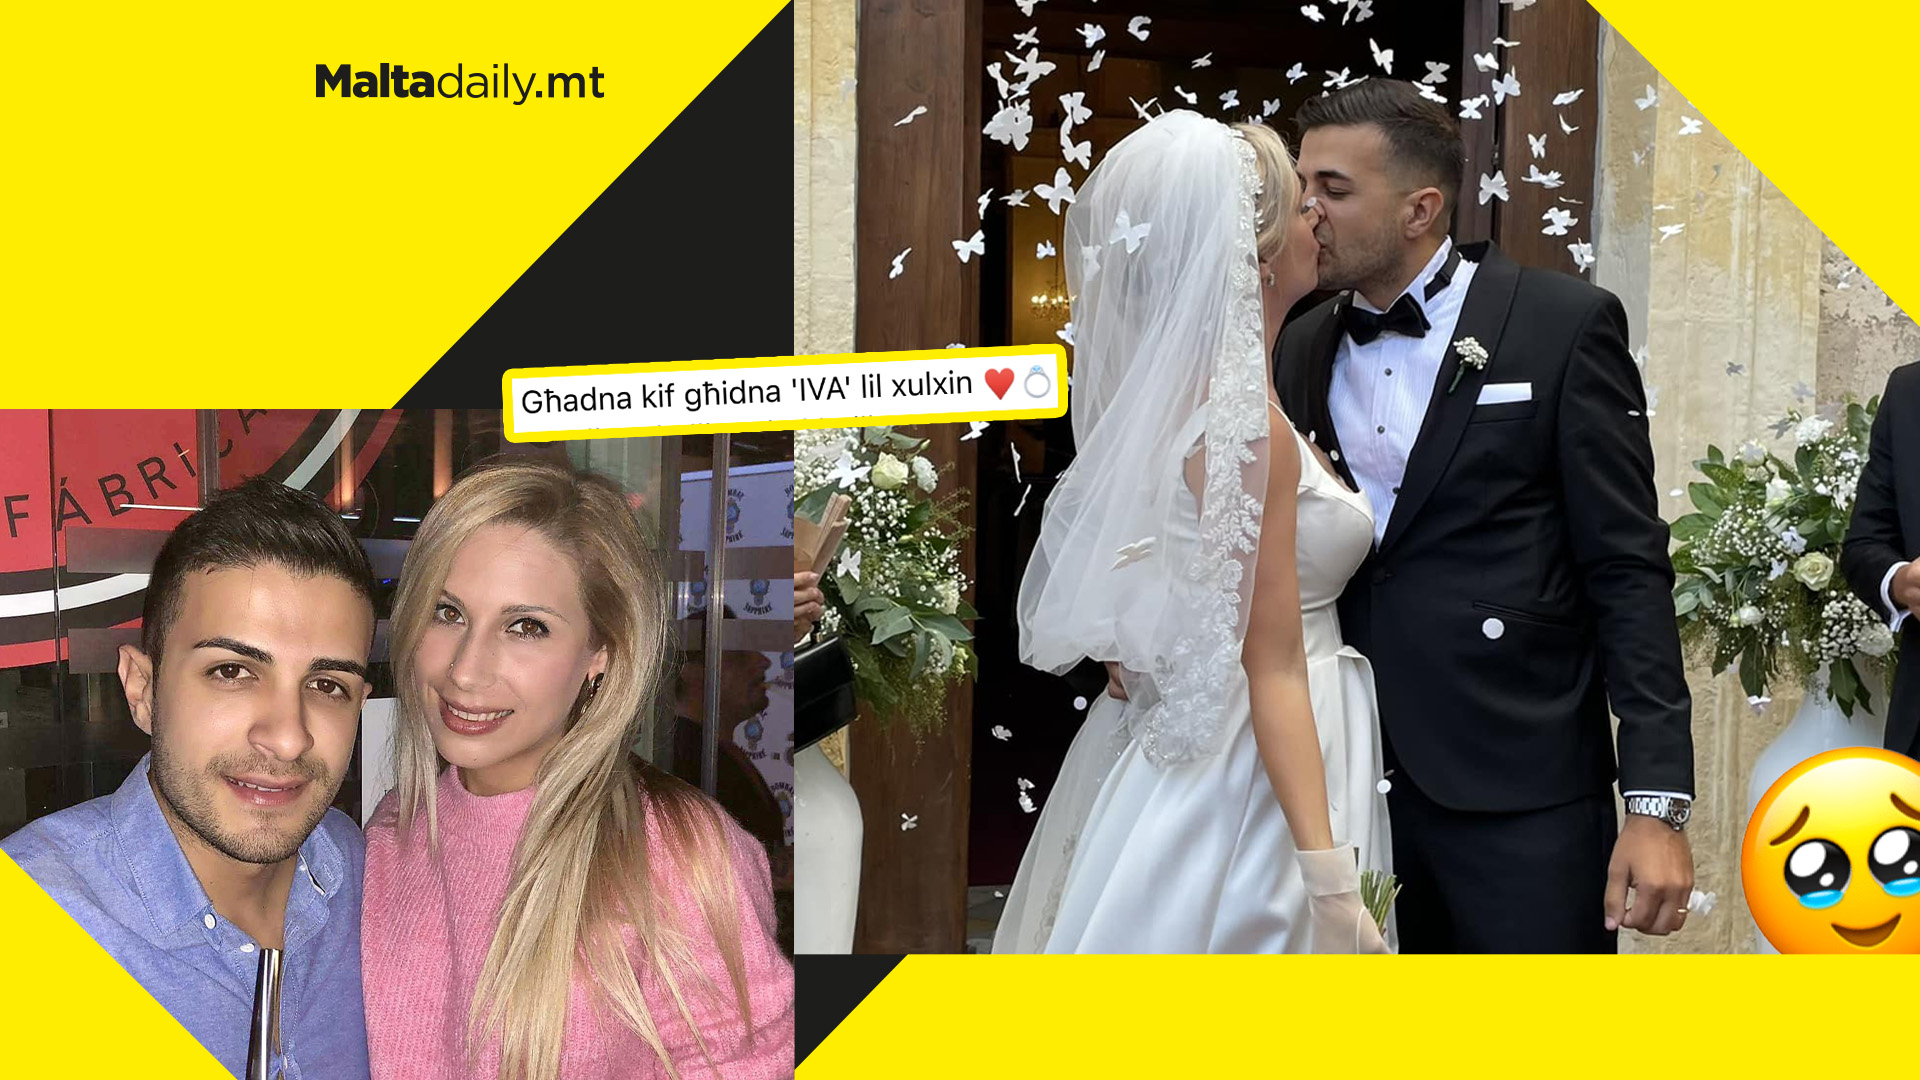 Nationalist Party MP Rebekah Cilia ties the knot with husband Jurgen